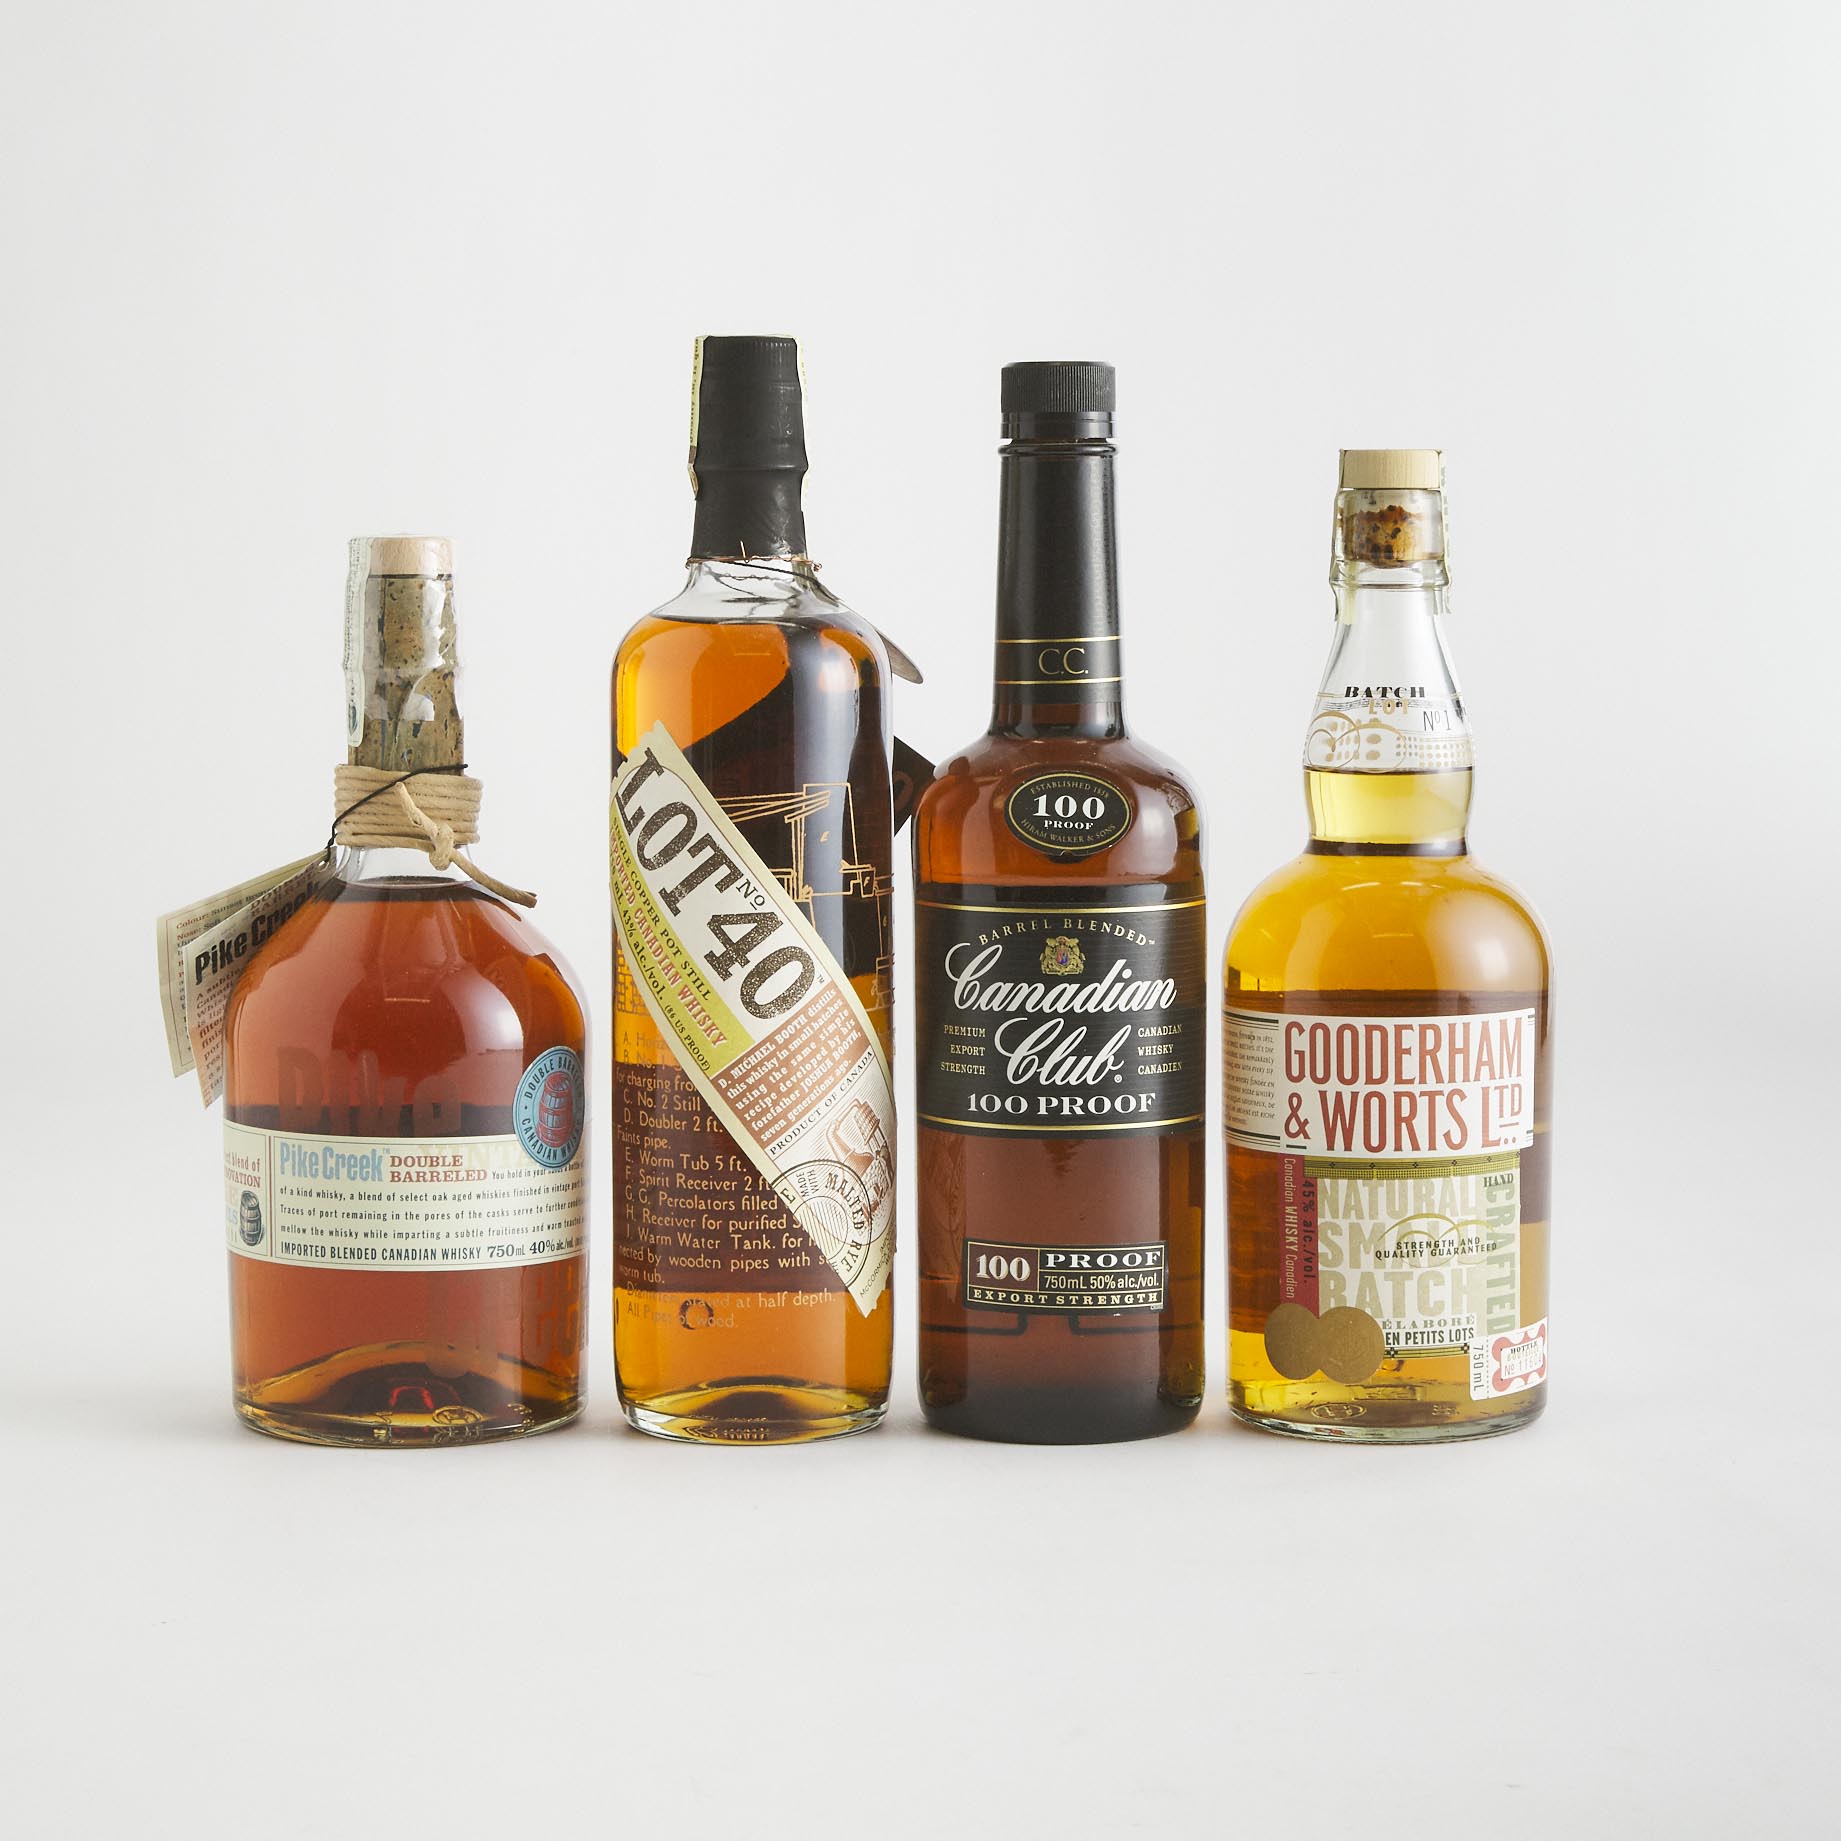 CANADIAN CLUB CANADIAN WHISKY NA (ONE 750 ML)
GOODERHAM & WORTS NATURAL SMALL BATCH CANADIAN WHISKY (ONE 750 ML)
LOT 40 SMALL BATCH IMPORTED CANADIAN RYE WHISKY (ONE 750 ML)
PIKE CREEK DOUBLE BARRELED SMALL BATCH IMPORTED CANADIAN WHISKY (ONE 750 ML)